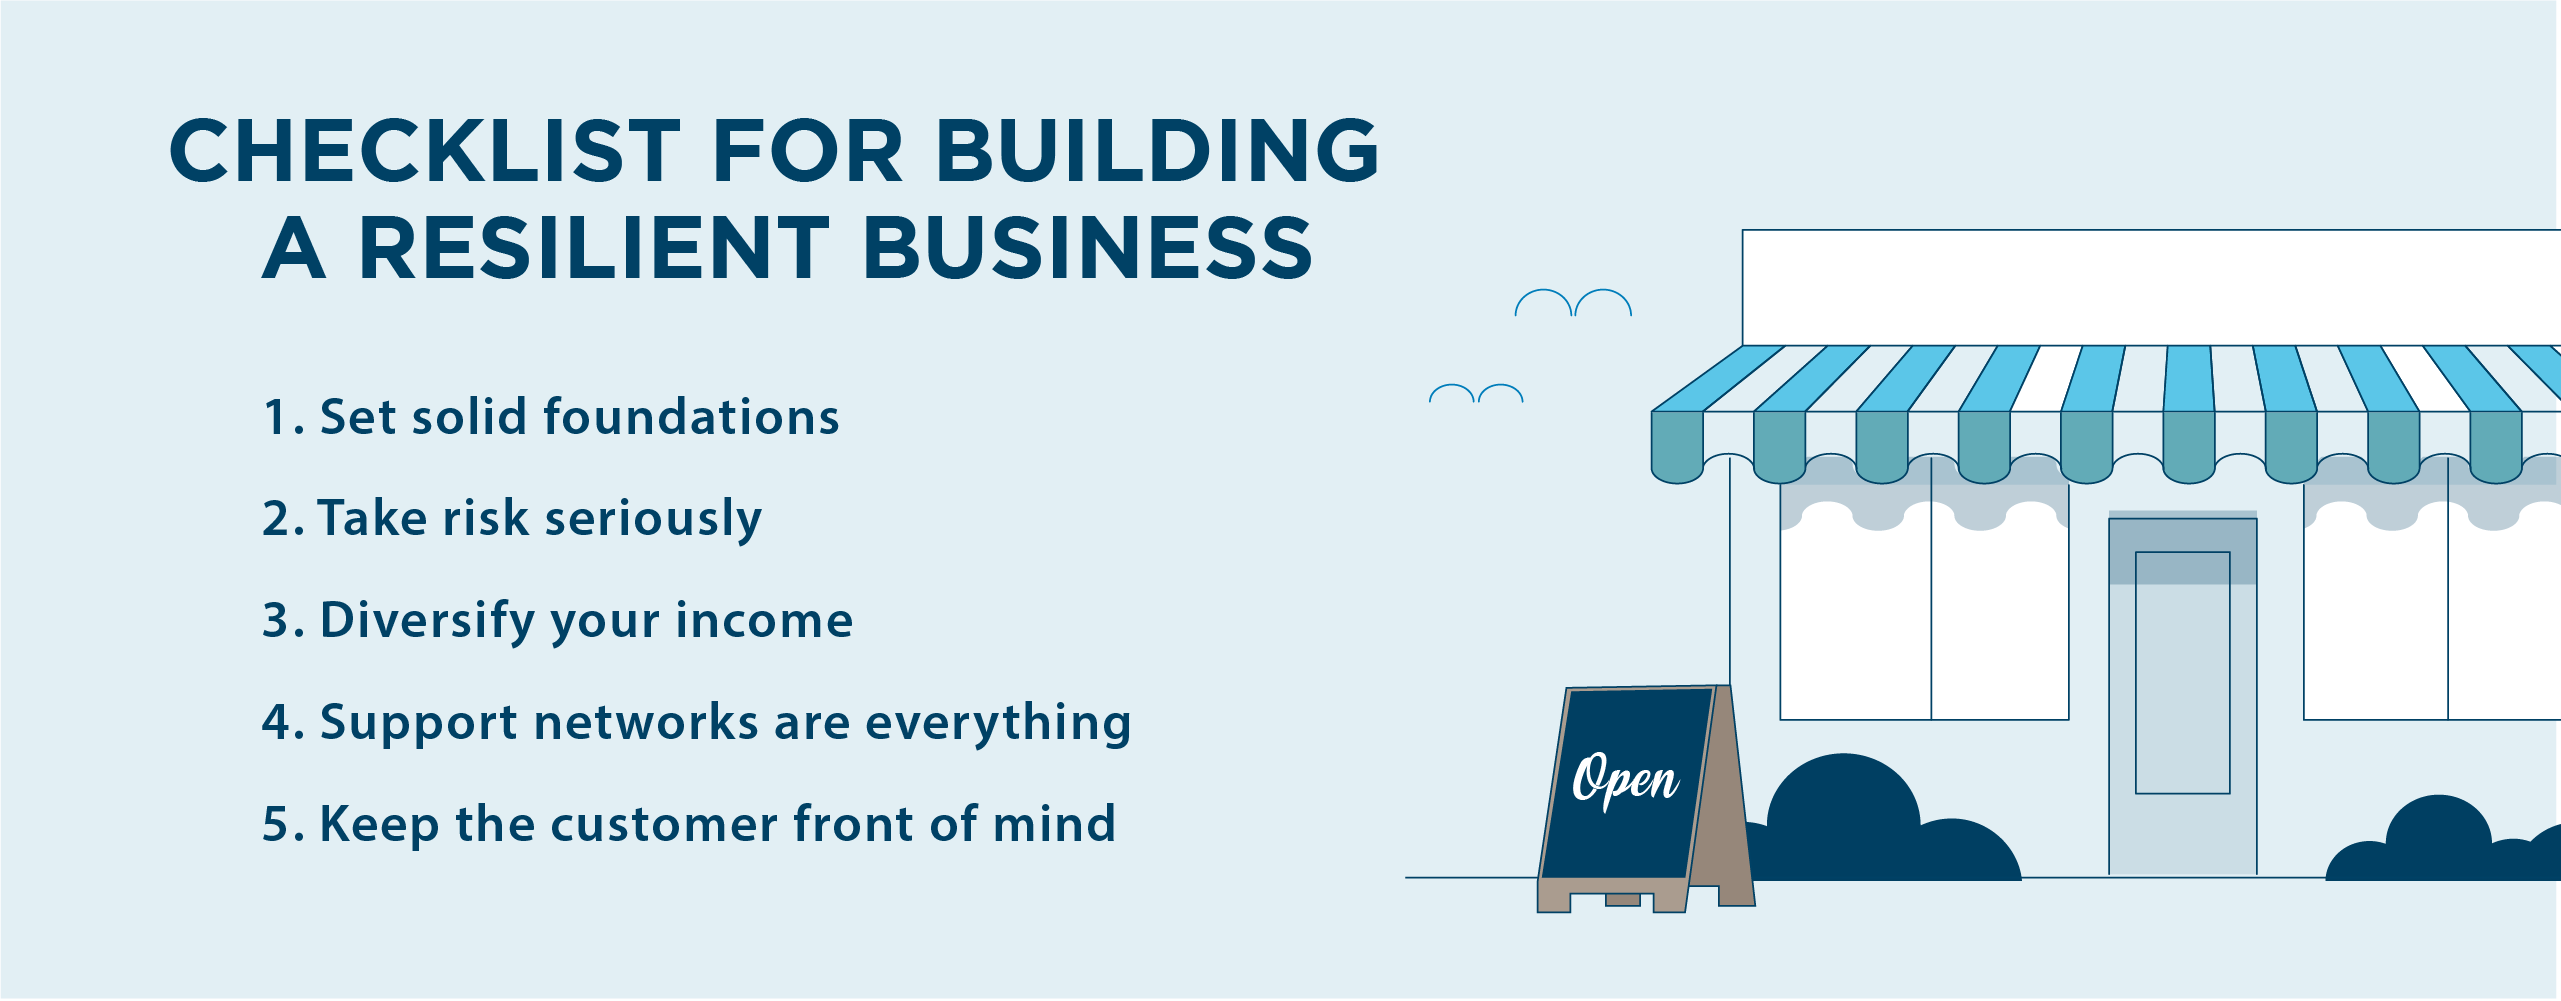 blue shopfront with a checklist for building a resilient business